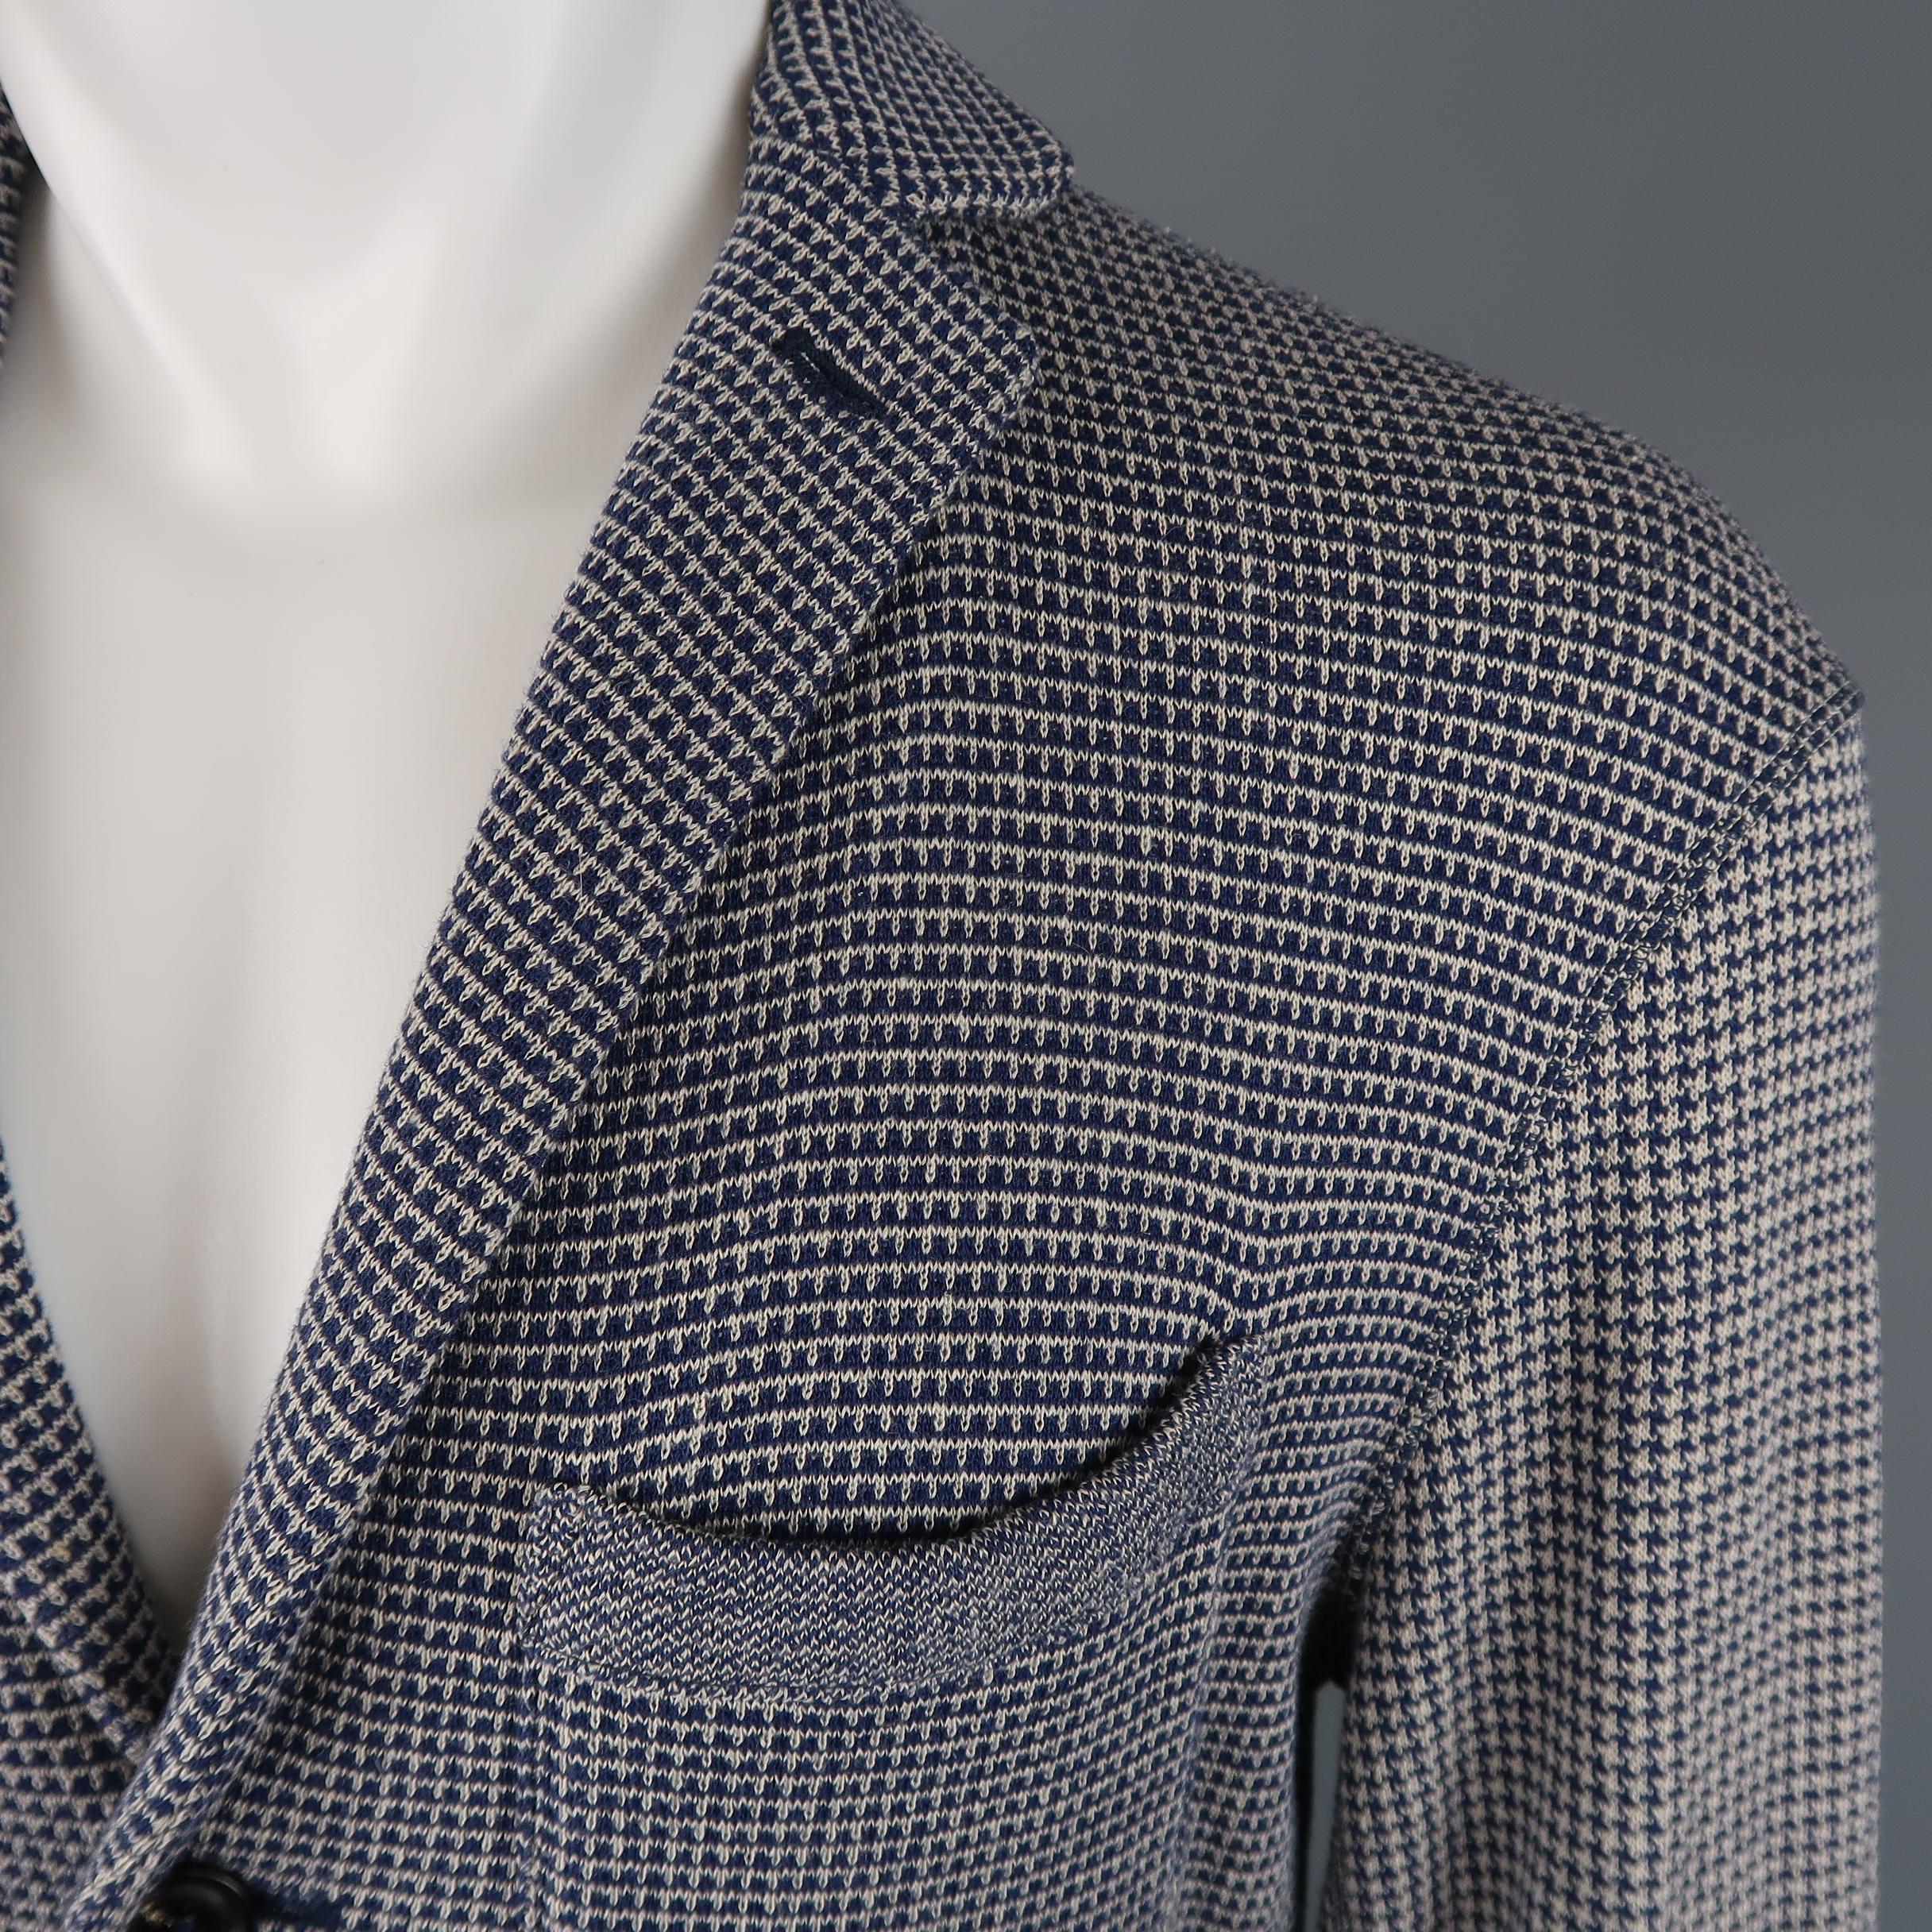 Single breasted 45RPM relaxed casual sport coat comes in a cotton linen blend knit with mixed houndstooth and windowpane prints, a notch lapel, three button front, and patch pockets. Made in Japan.
 
Excellent Pre-Owned Condition.
Marked: JP 5
